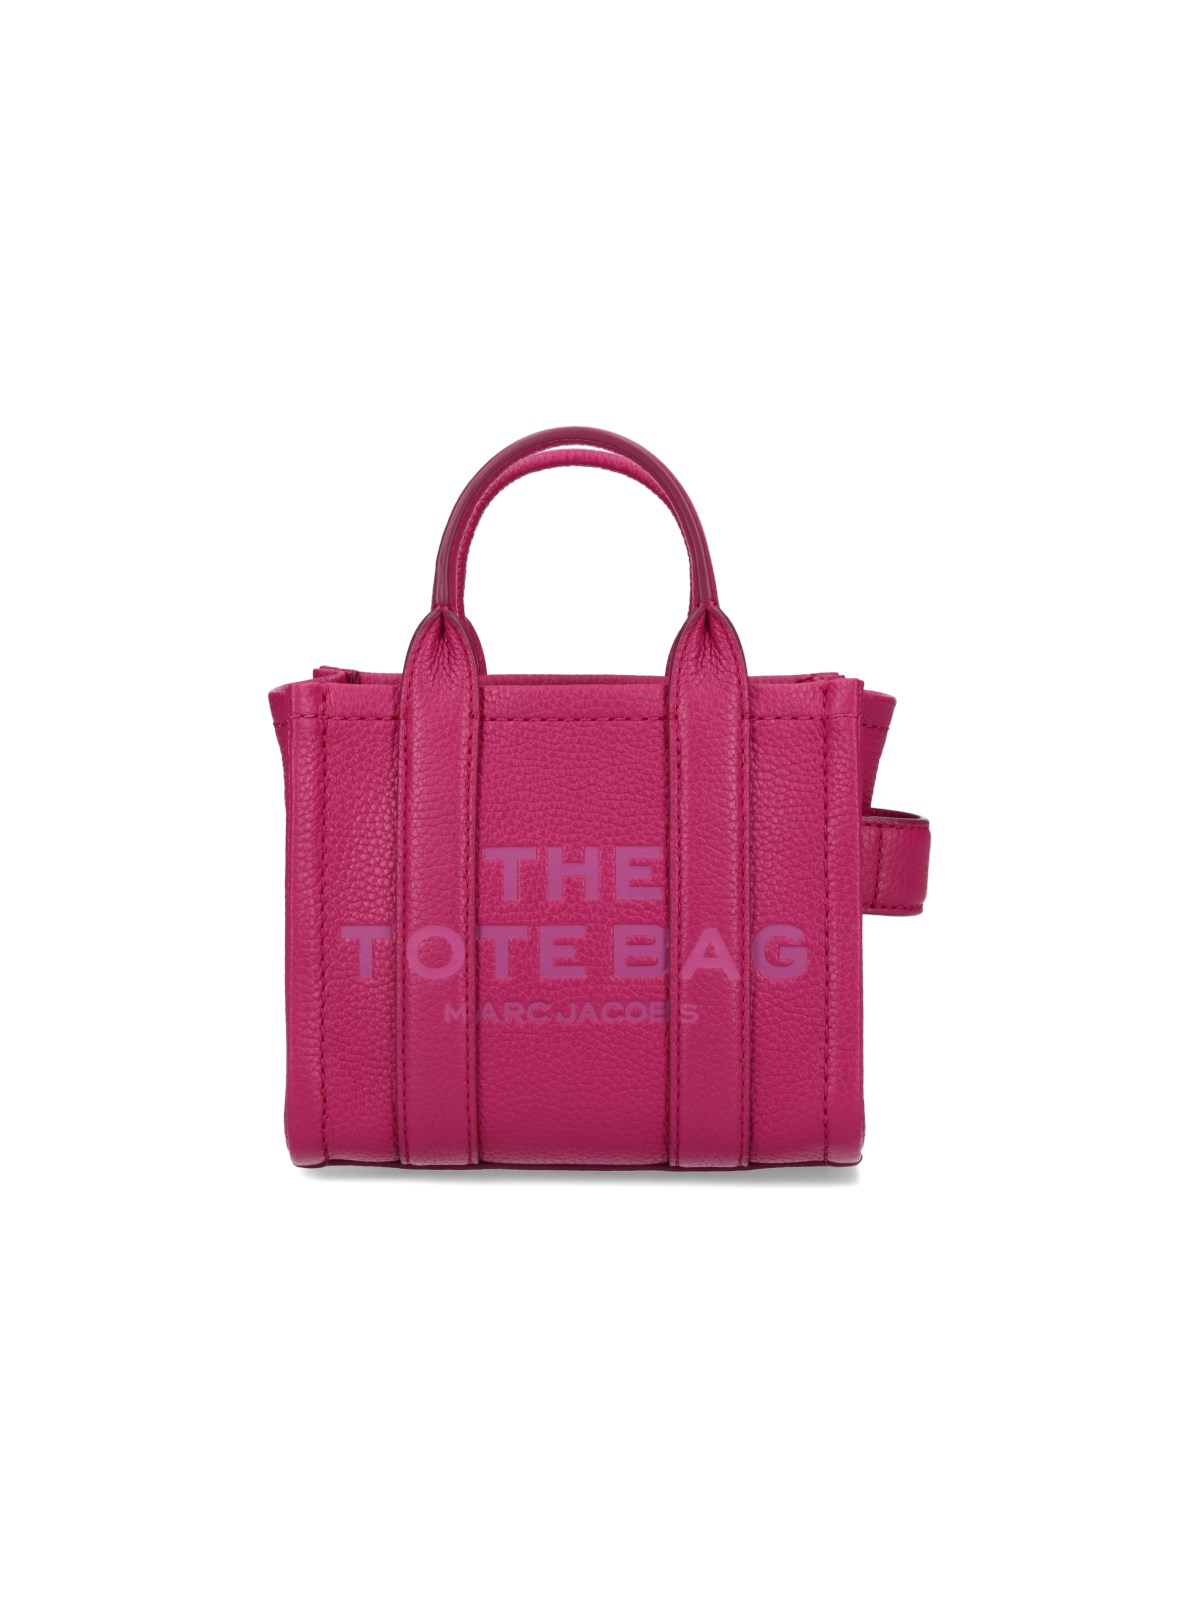 Marc Jacobs "the Mini Tote" Bag In Purple